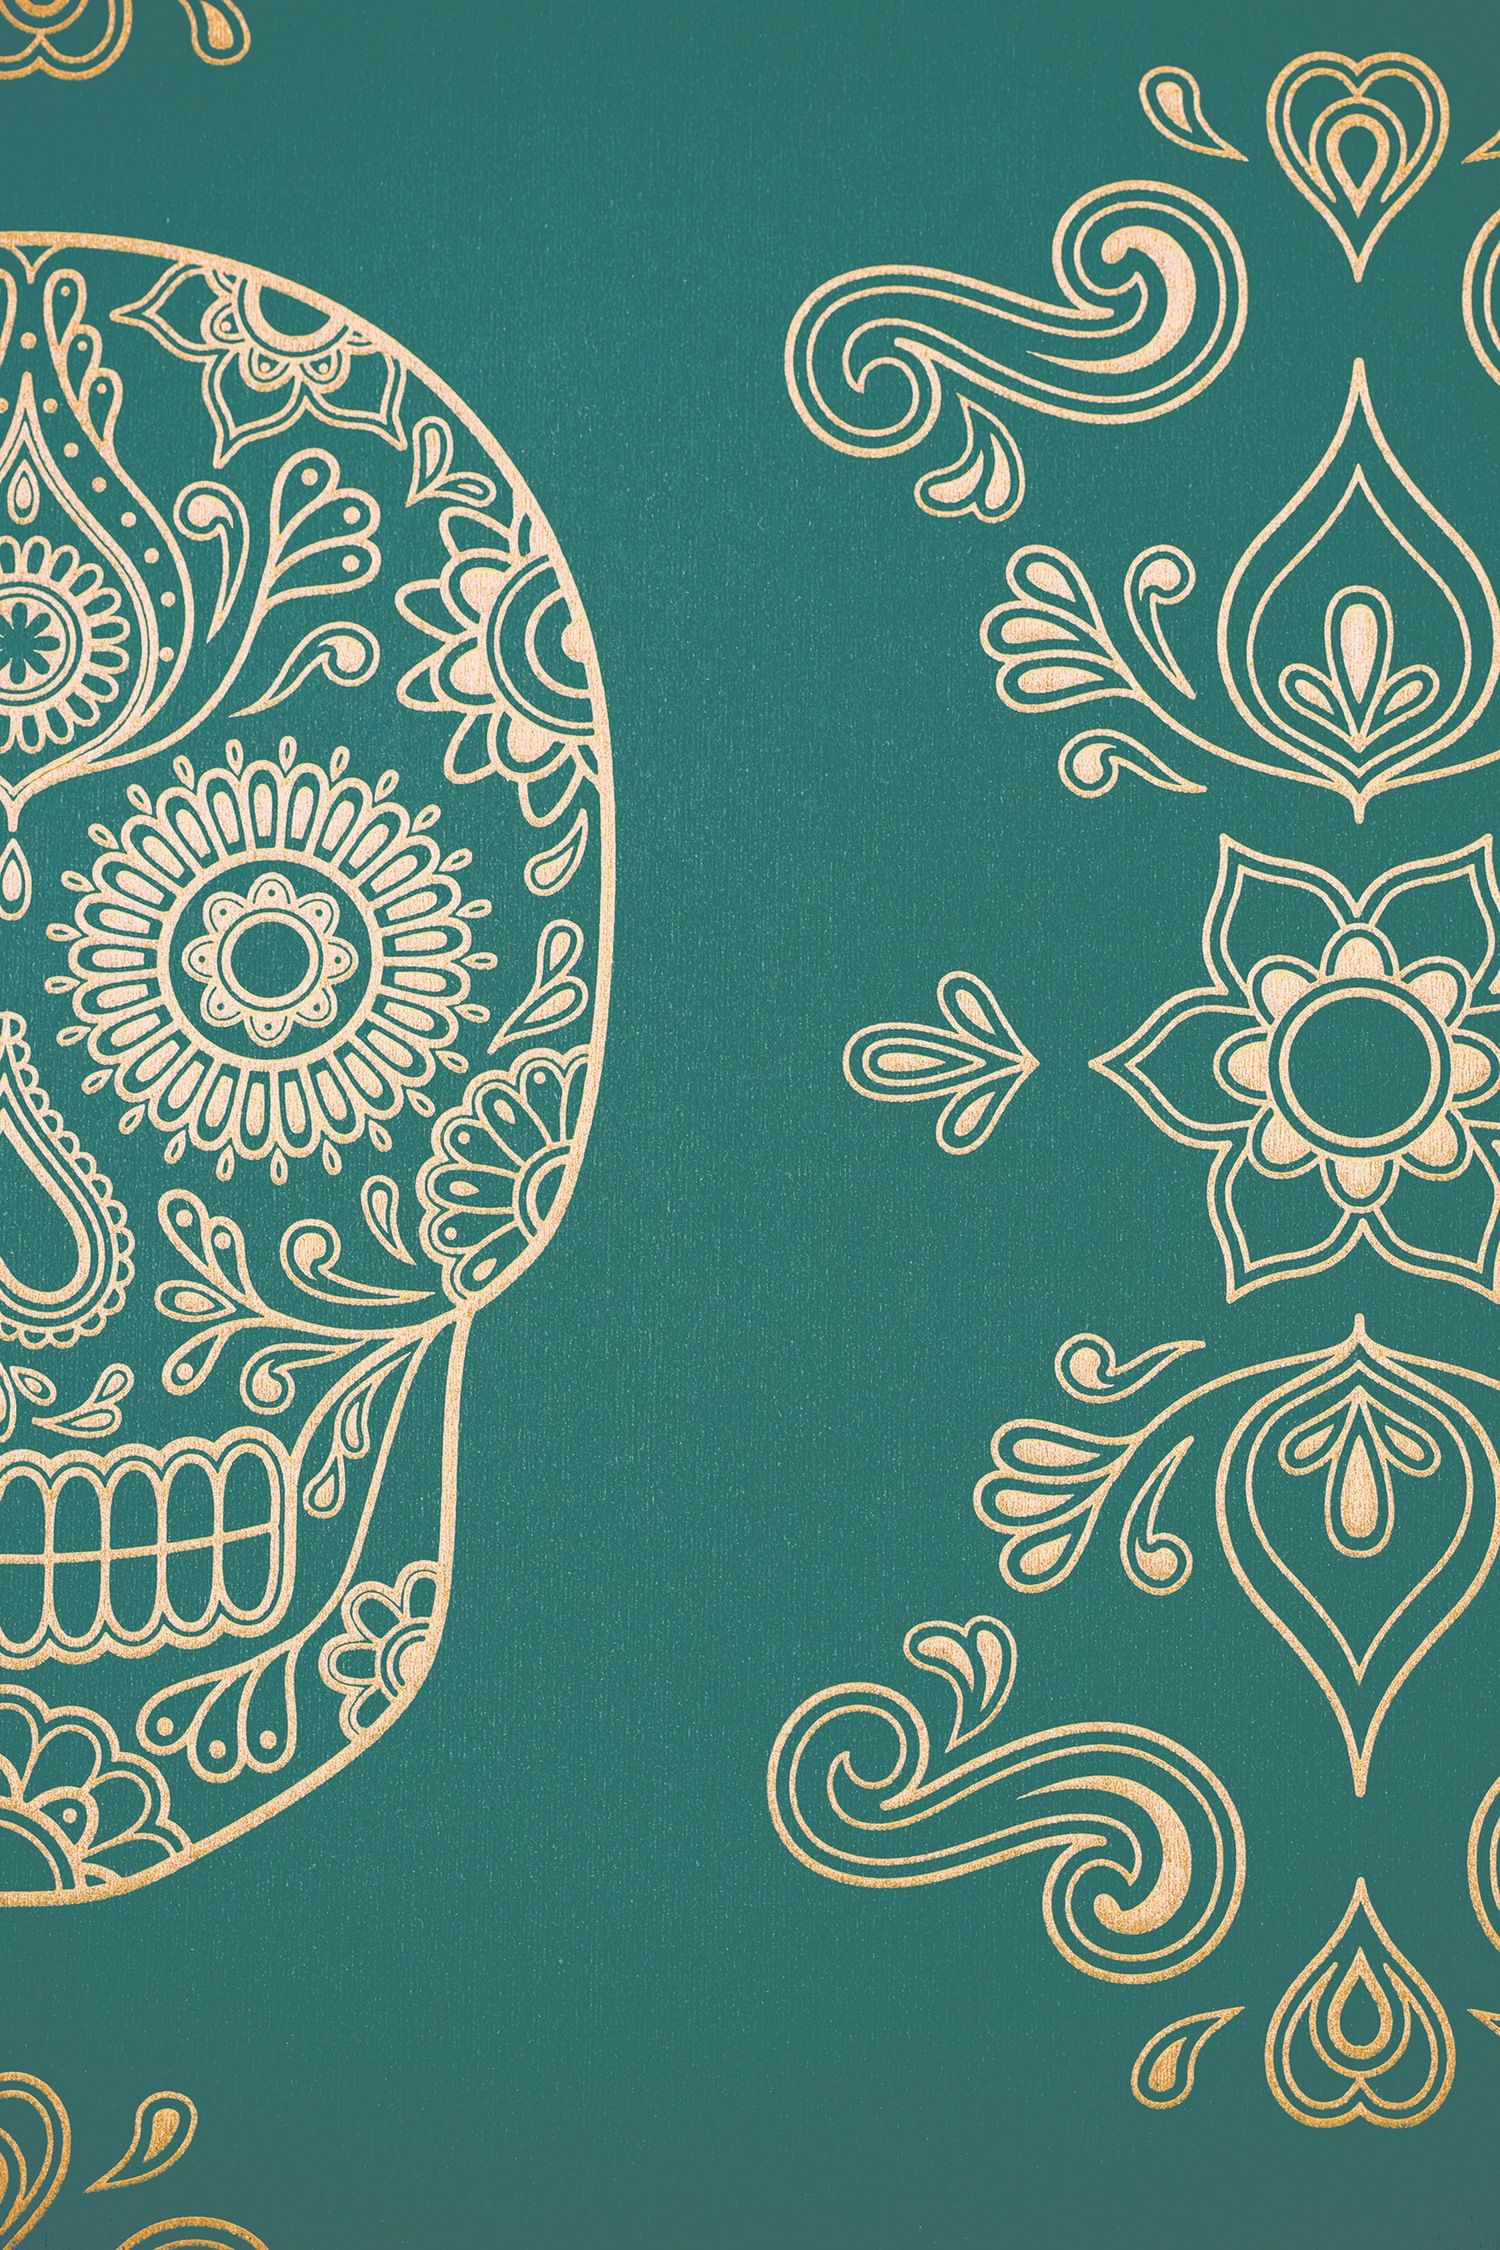 free-download-day-of-the-dead-sugar-skull-wallpaper-emerald-gold